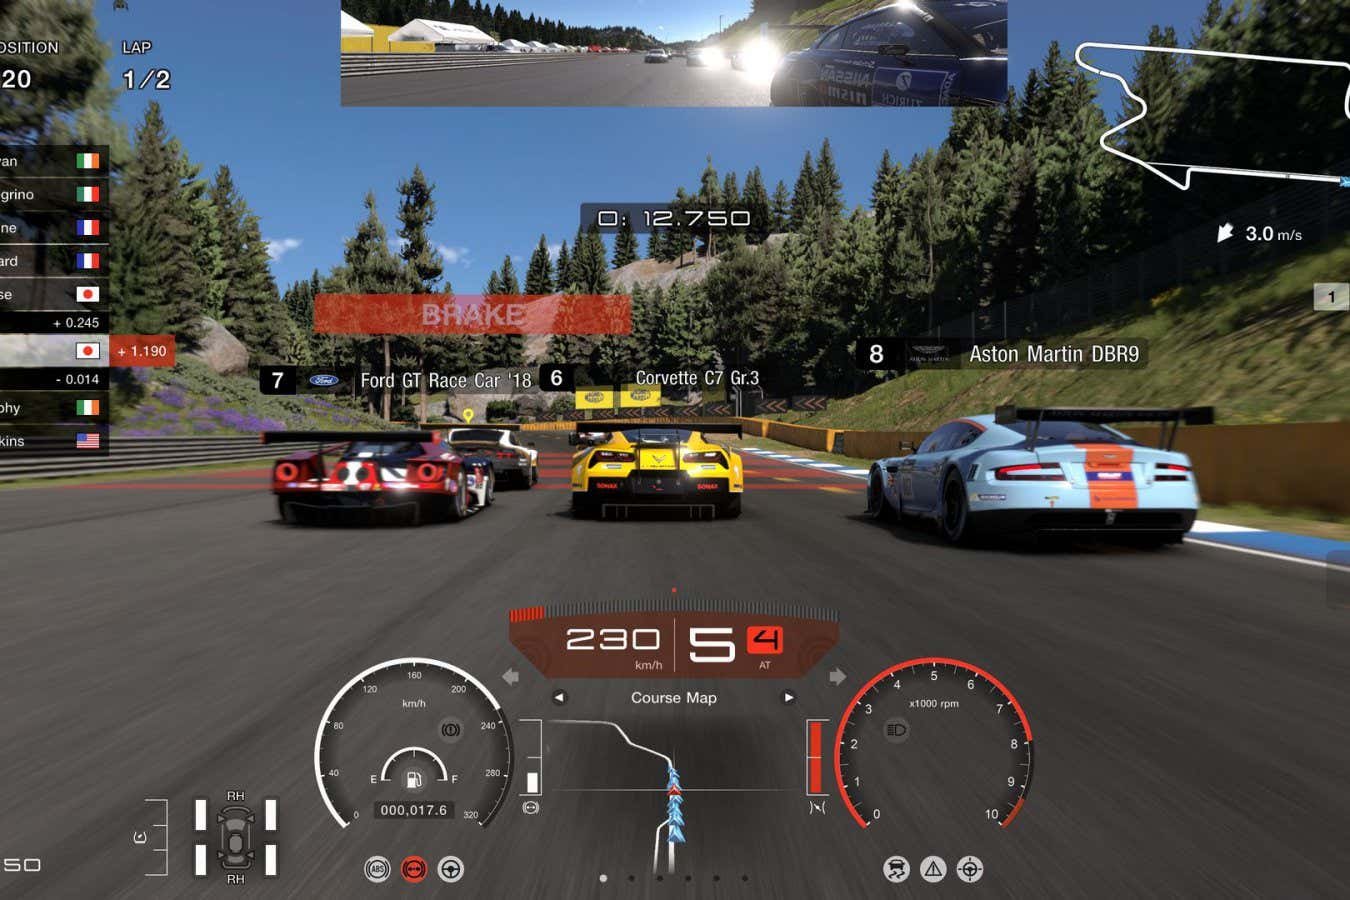 AI beats top racers at Gran Turismo – with out cheating